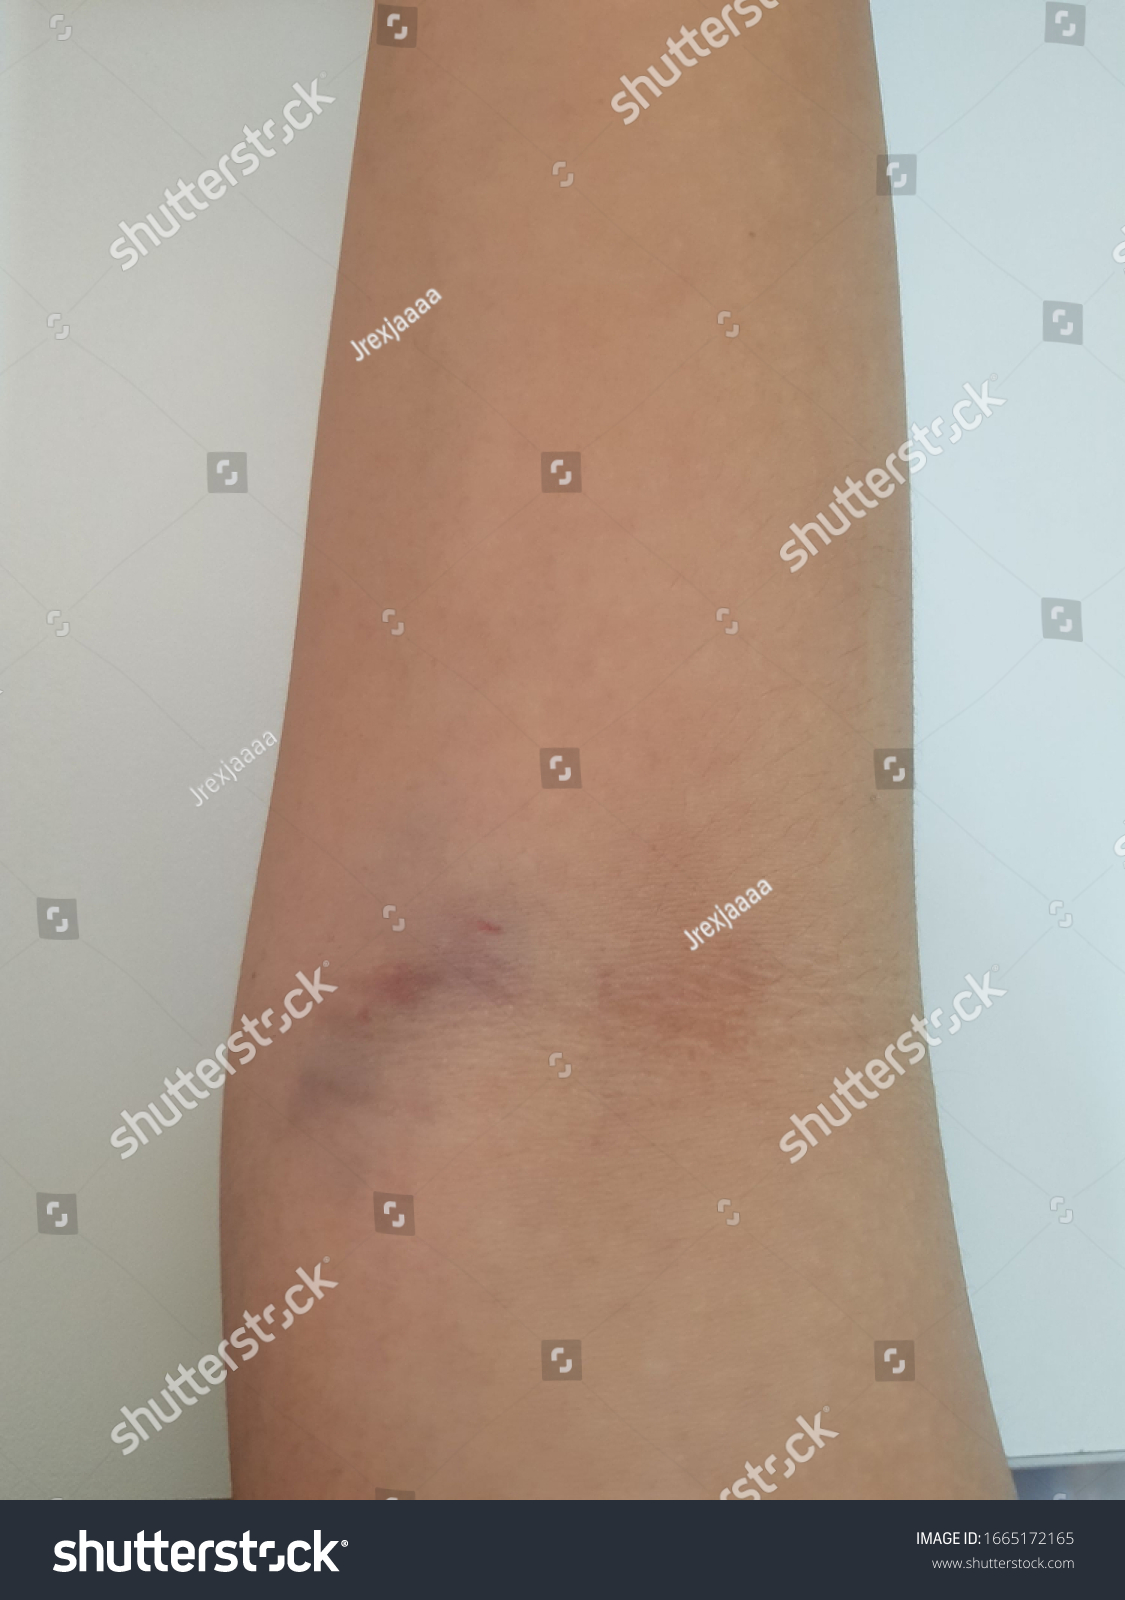 Arms Asian Woman Swelling After Bruising Stock Photo 1665172165